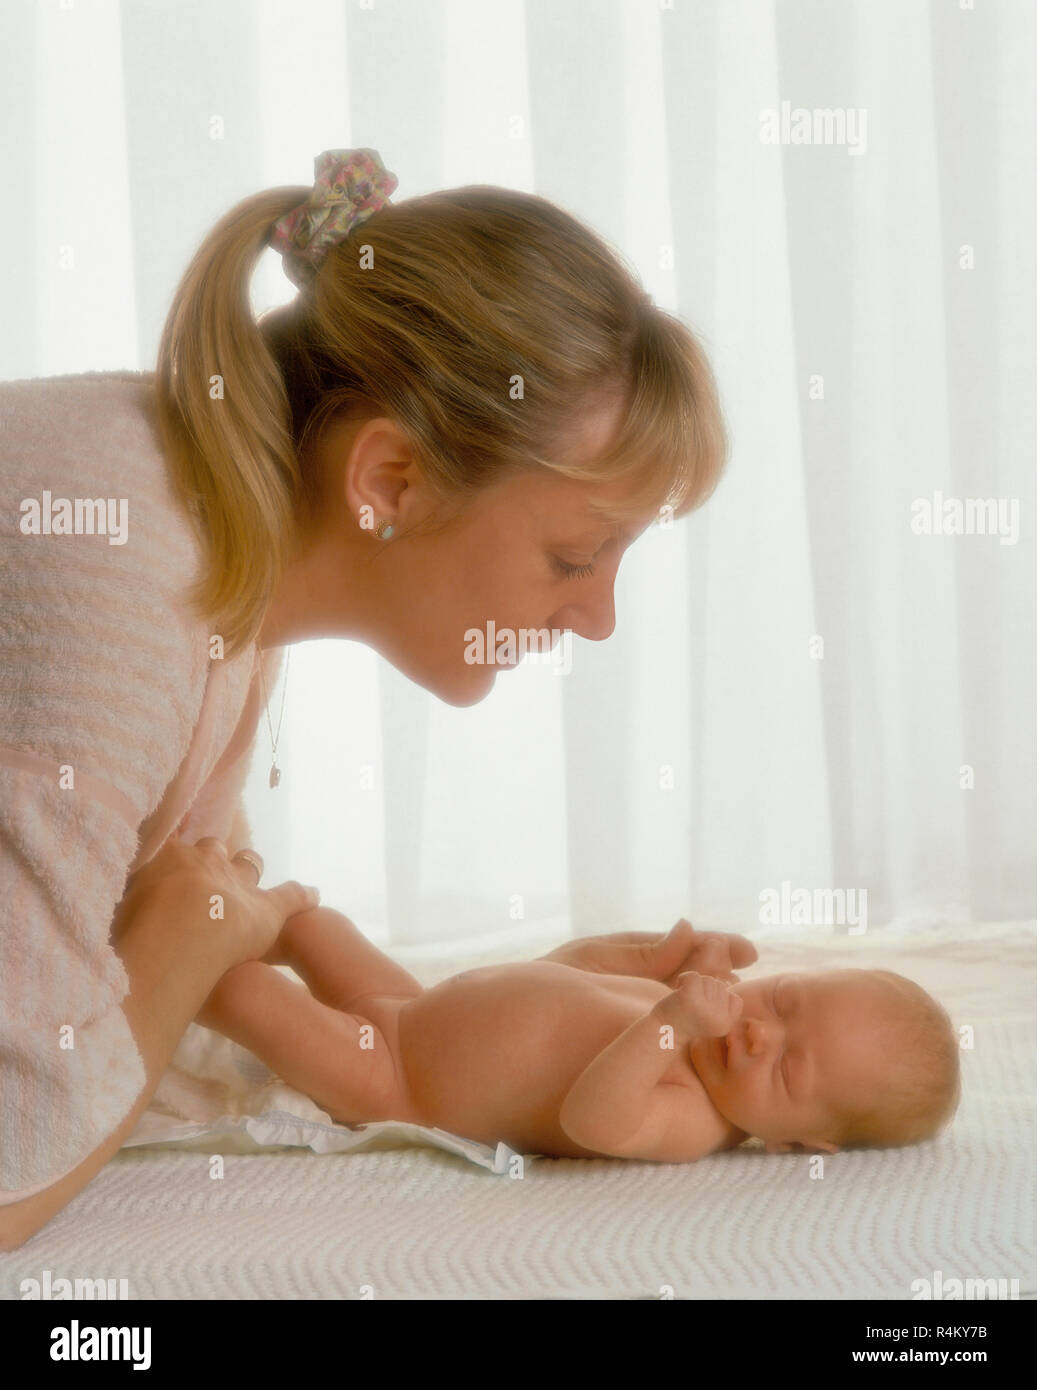 Mother with newborn baby. Stock Photo